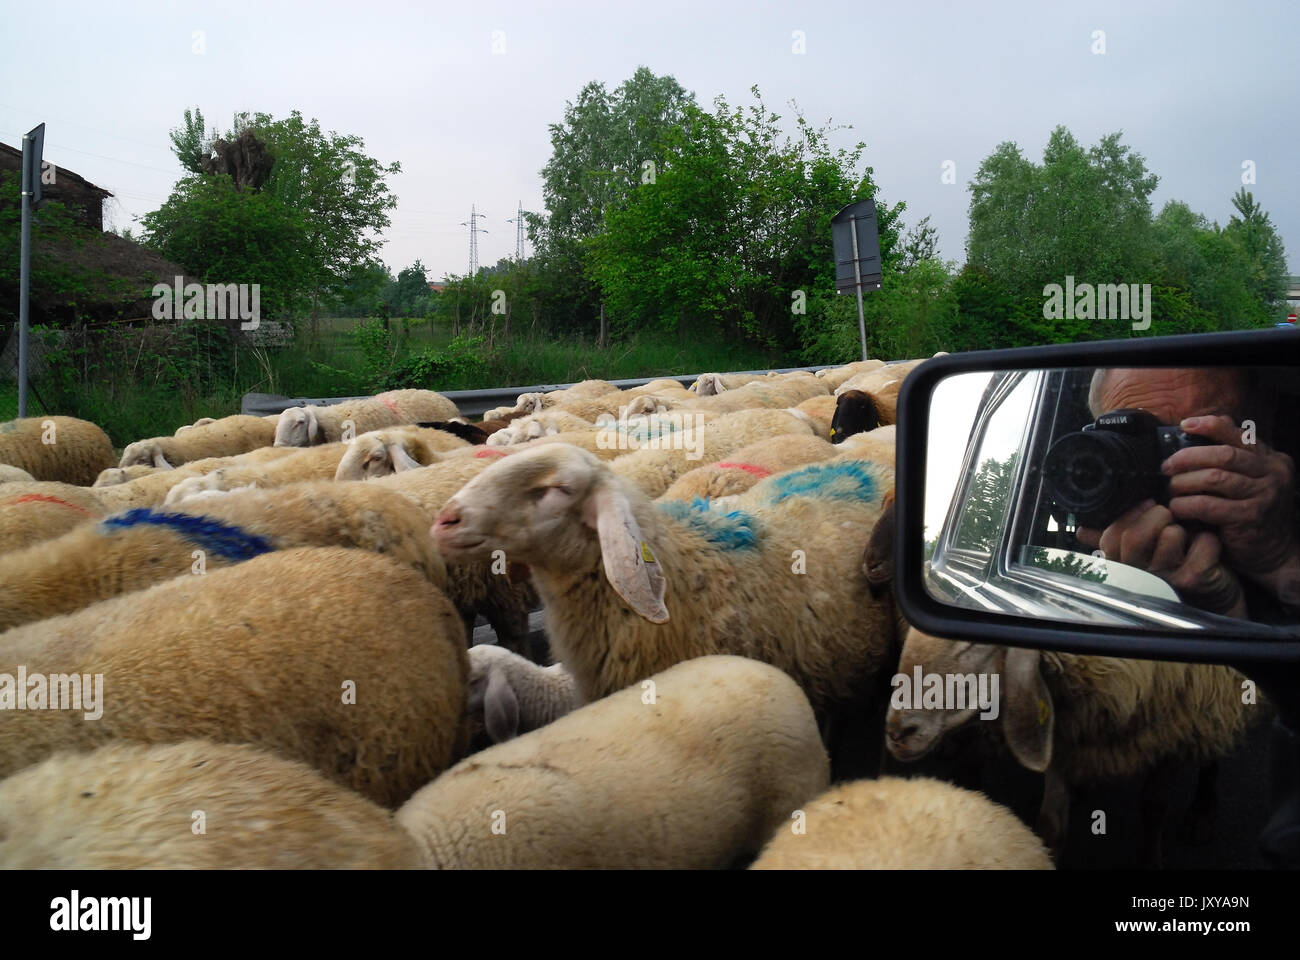 Cadoneghe, Italy. Transhumance of a sheep flock,  from plains to mountains. A transhumant flock of sheep, on its way to the mountain pasture-lands. Stock Photo